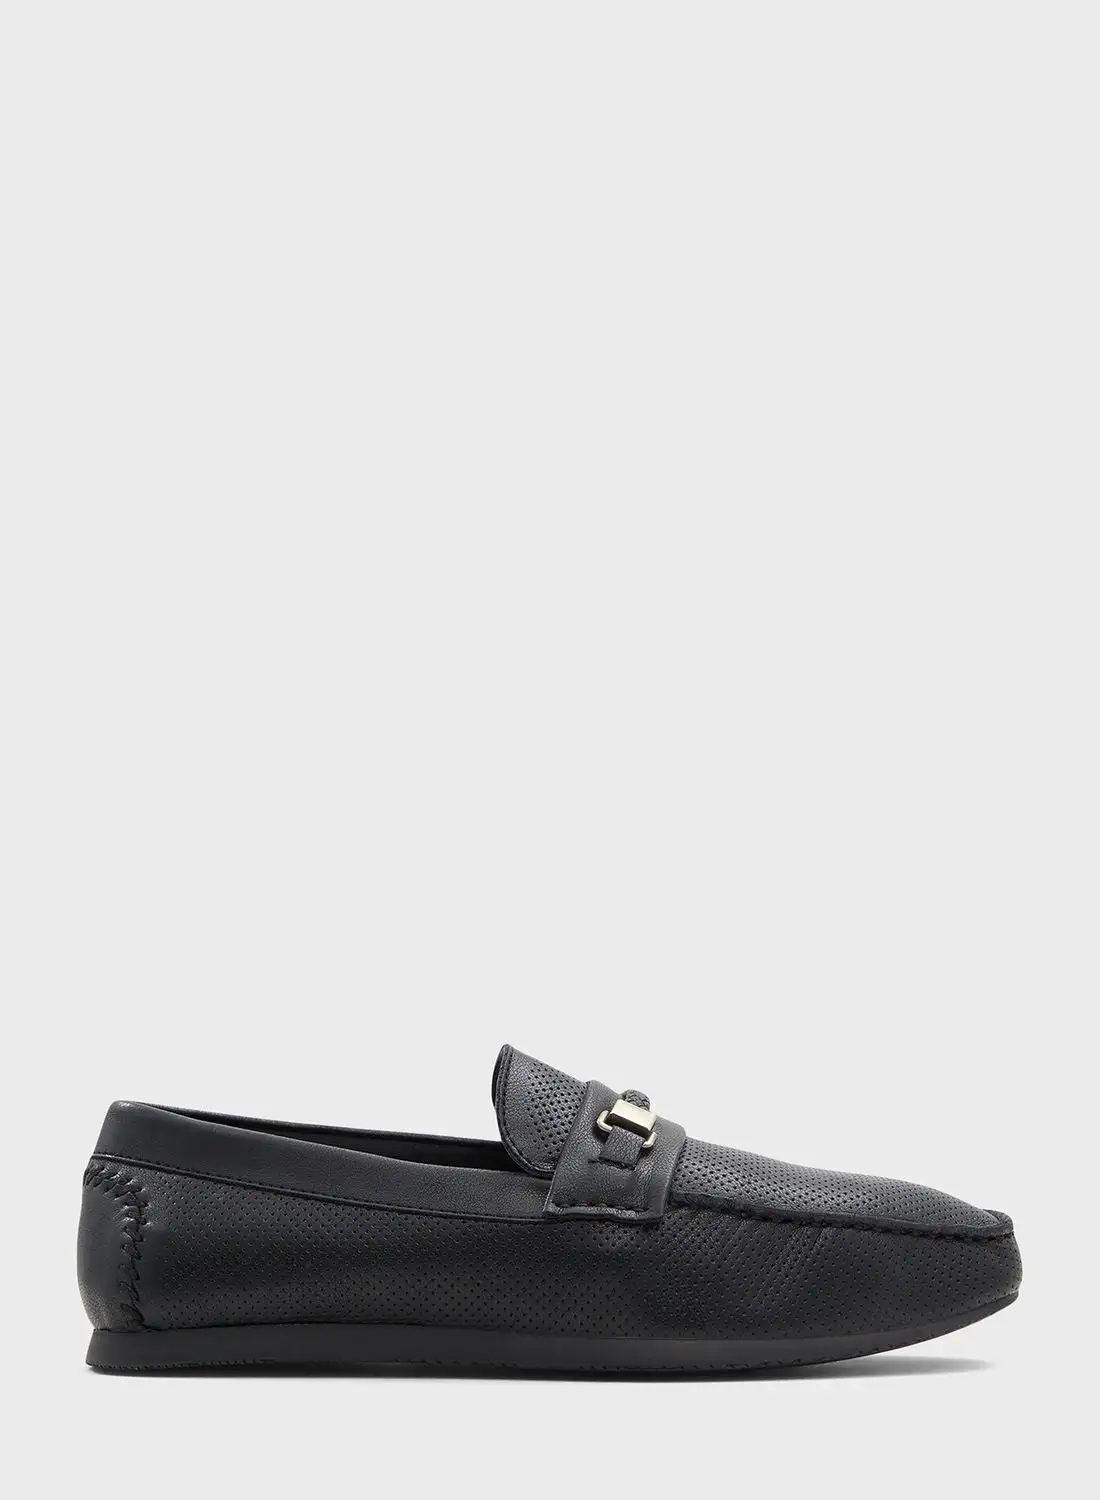 CALL IT SPRING Percivel Slip On Loafers